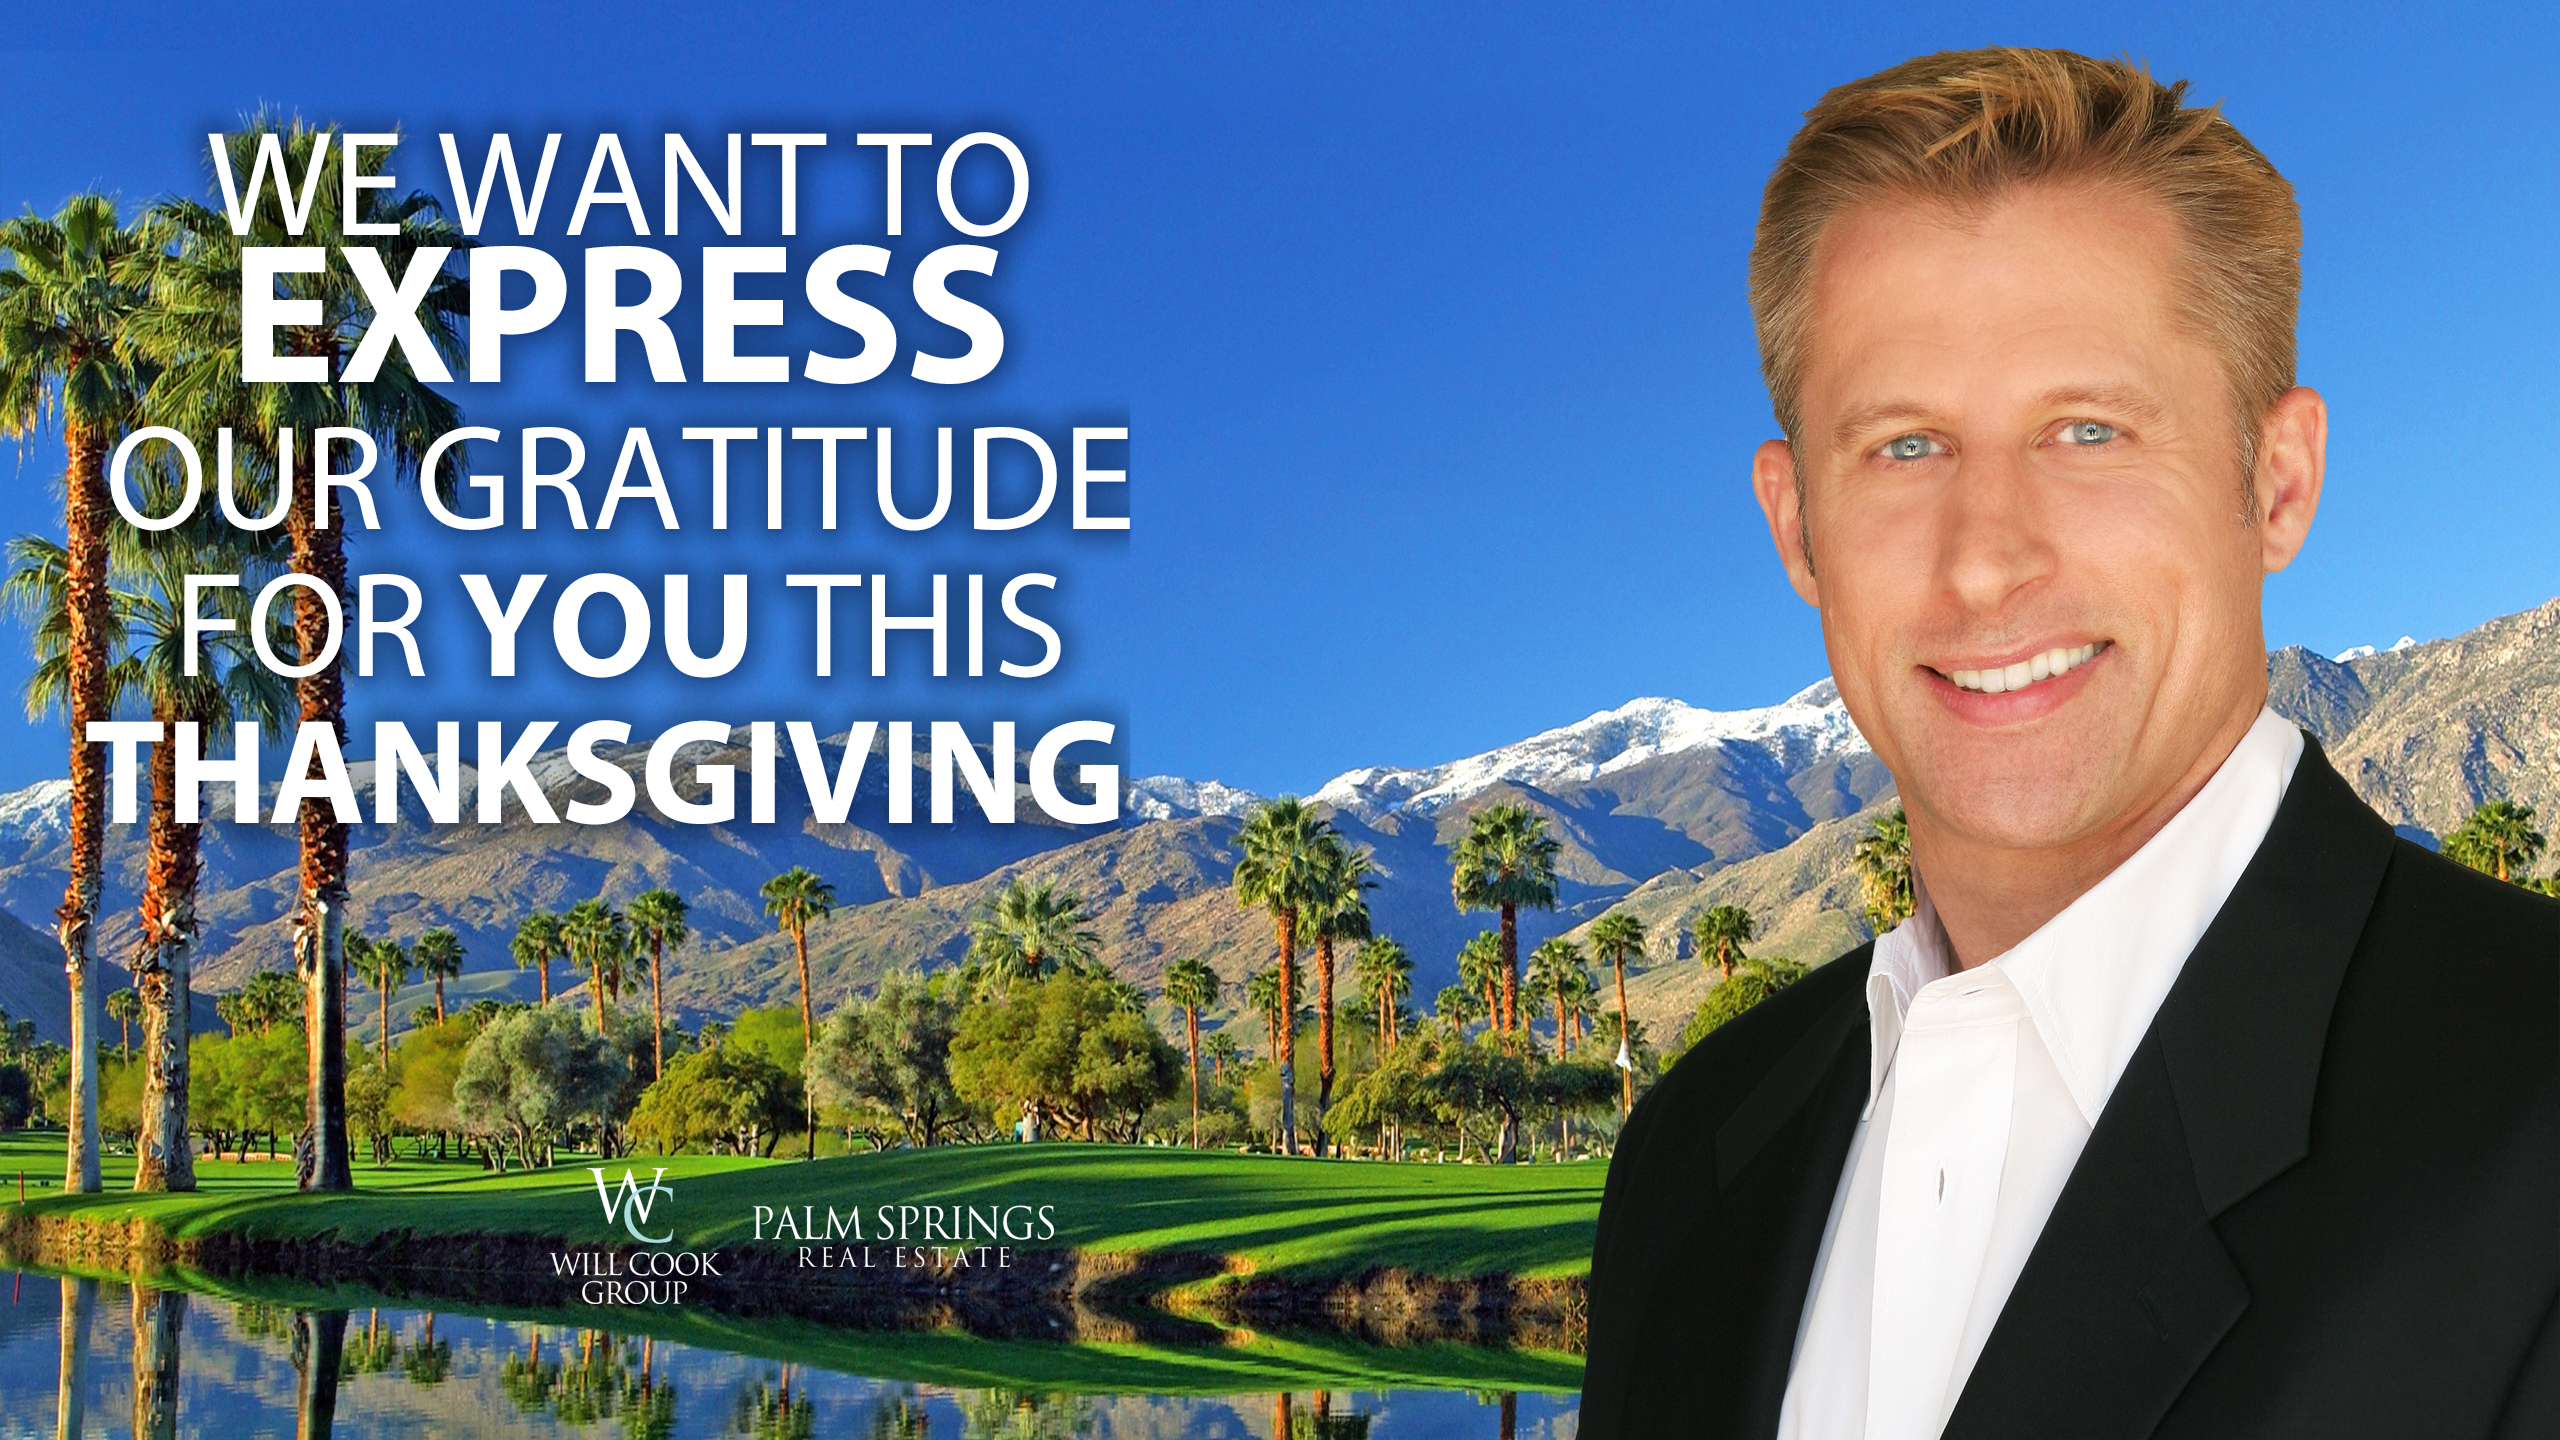 We Want to Express Our Gratitude for You This Thanksgiving